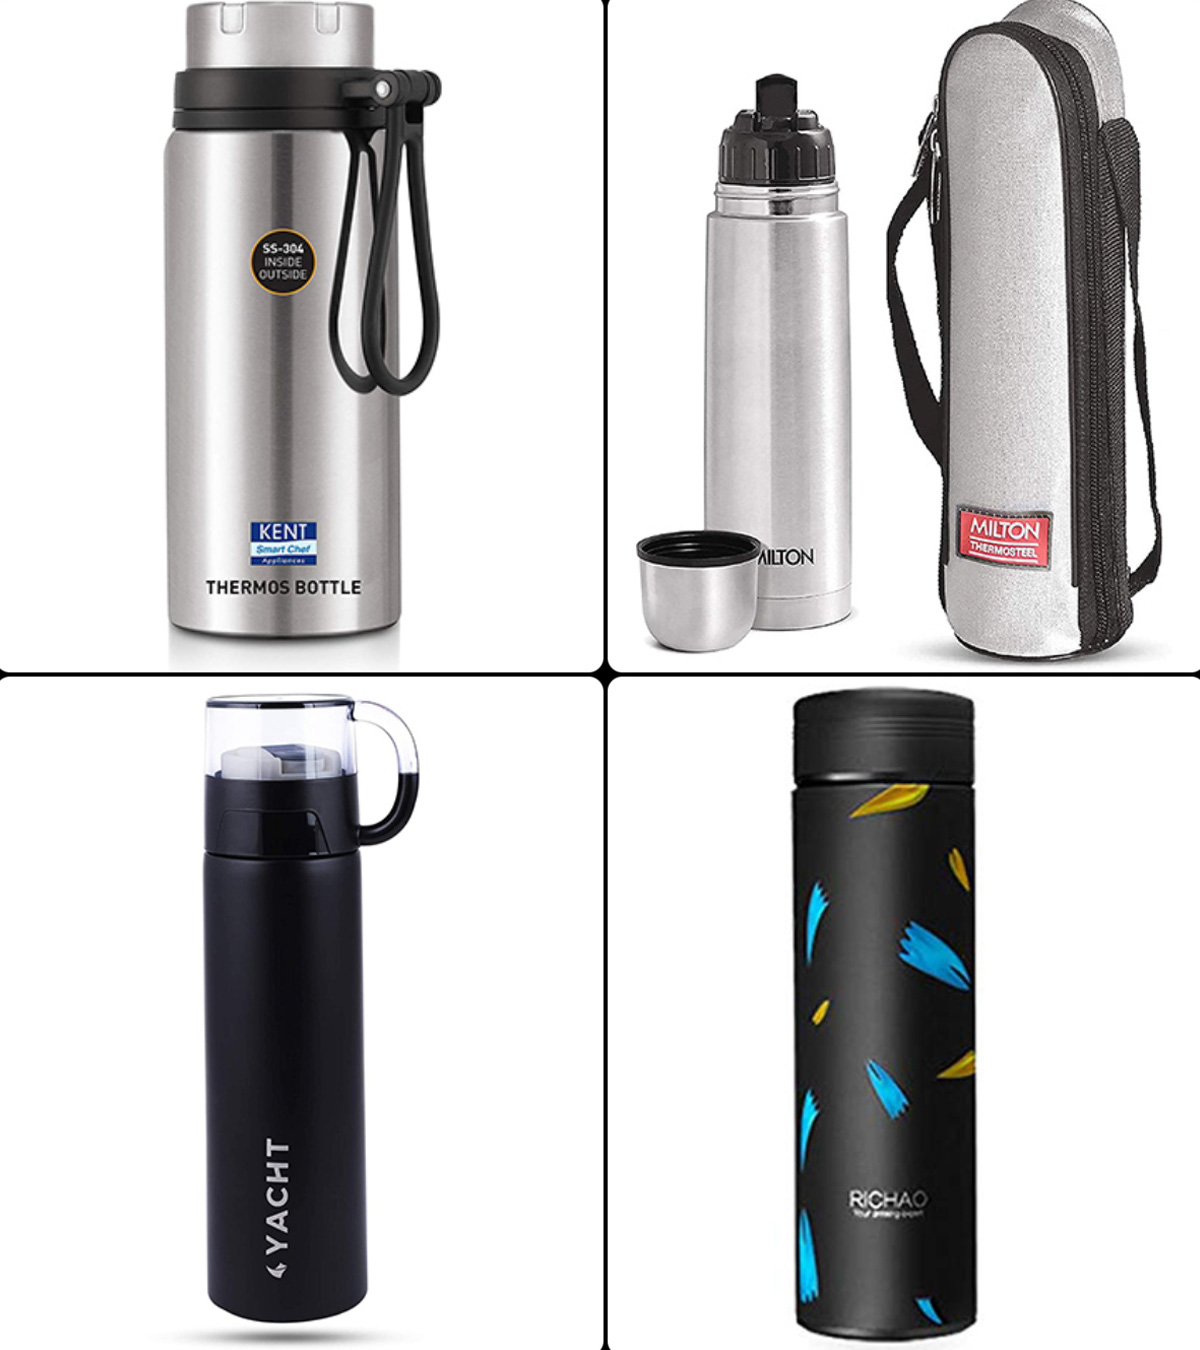 https://www.momjunction.com/wp-content/uploads/2020/10/Best-Thermos-Flask-To-Buy-In-India1.jpg